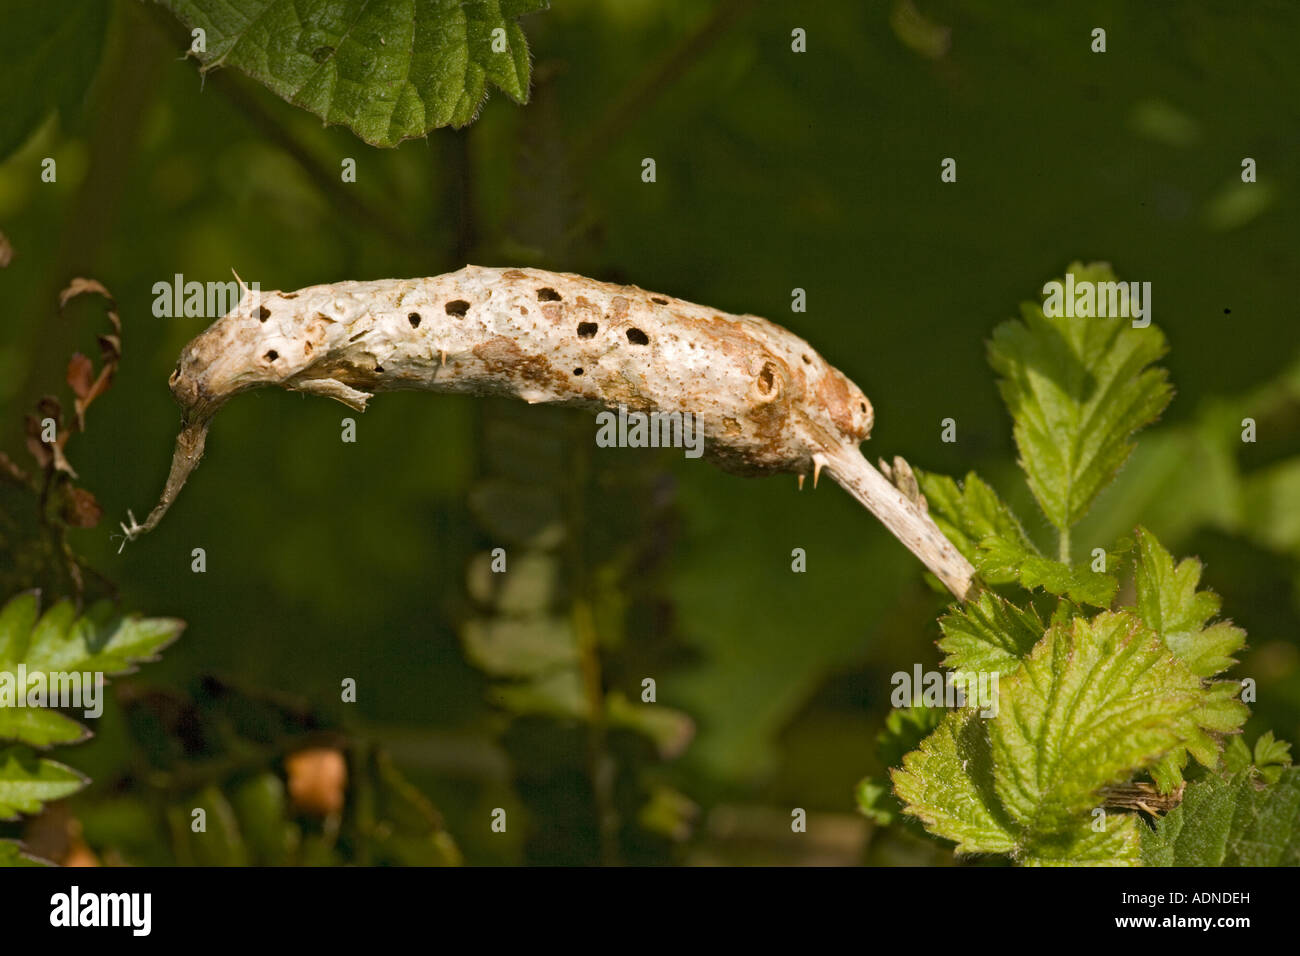 Gall caused by gall wasp on bramble stem Diastrophus rubi Dorset Stock Photo